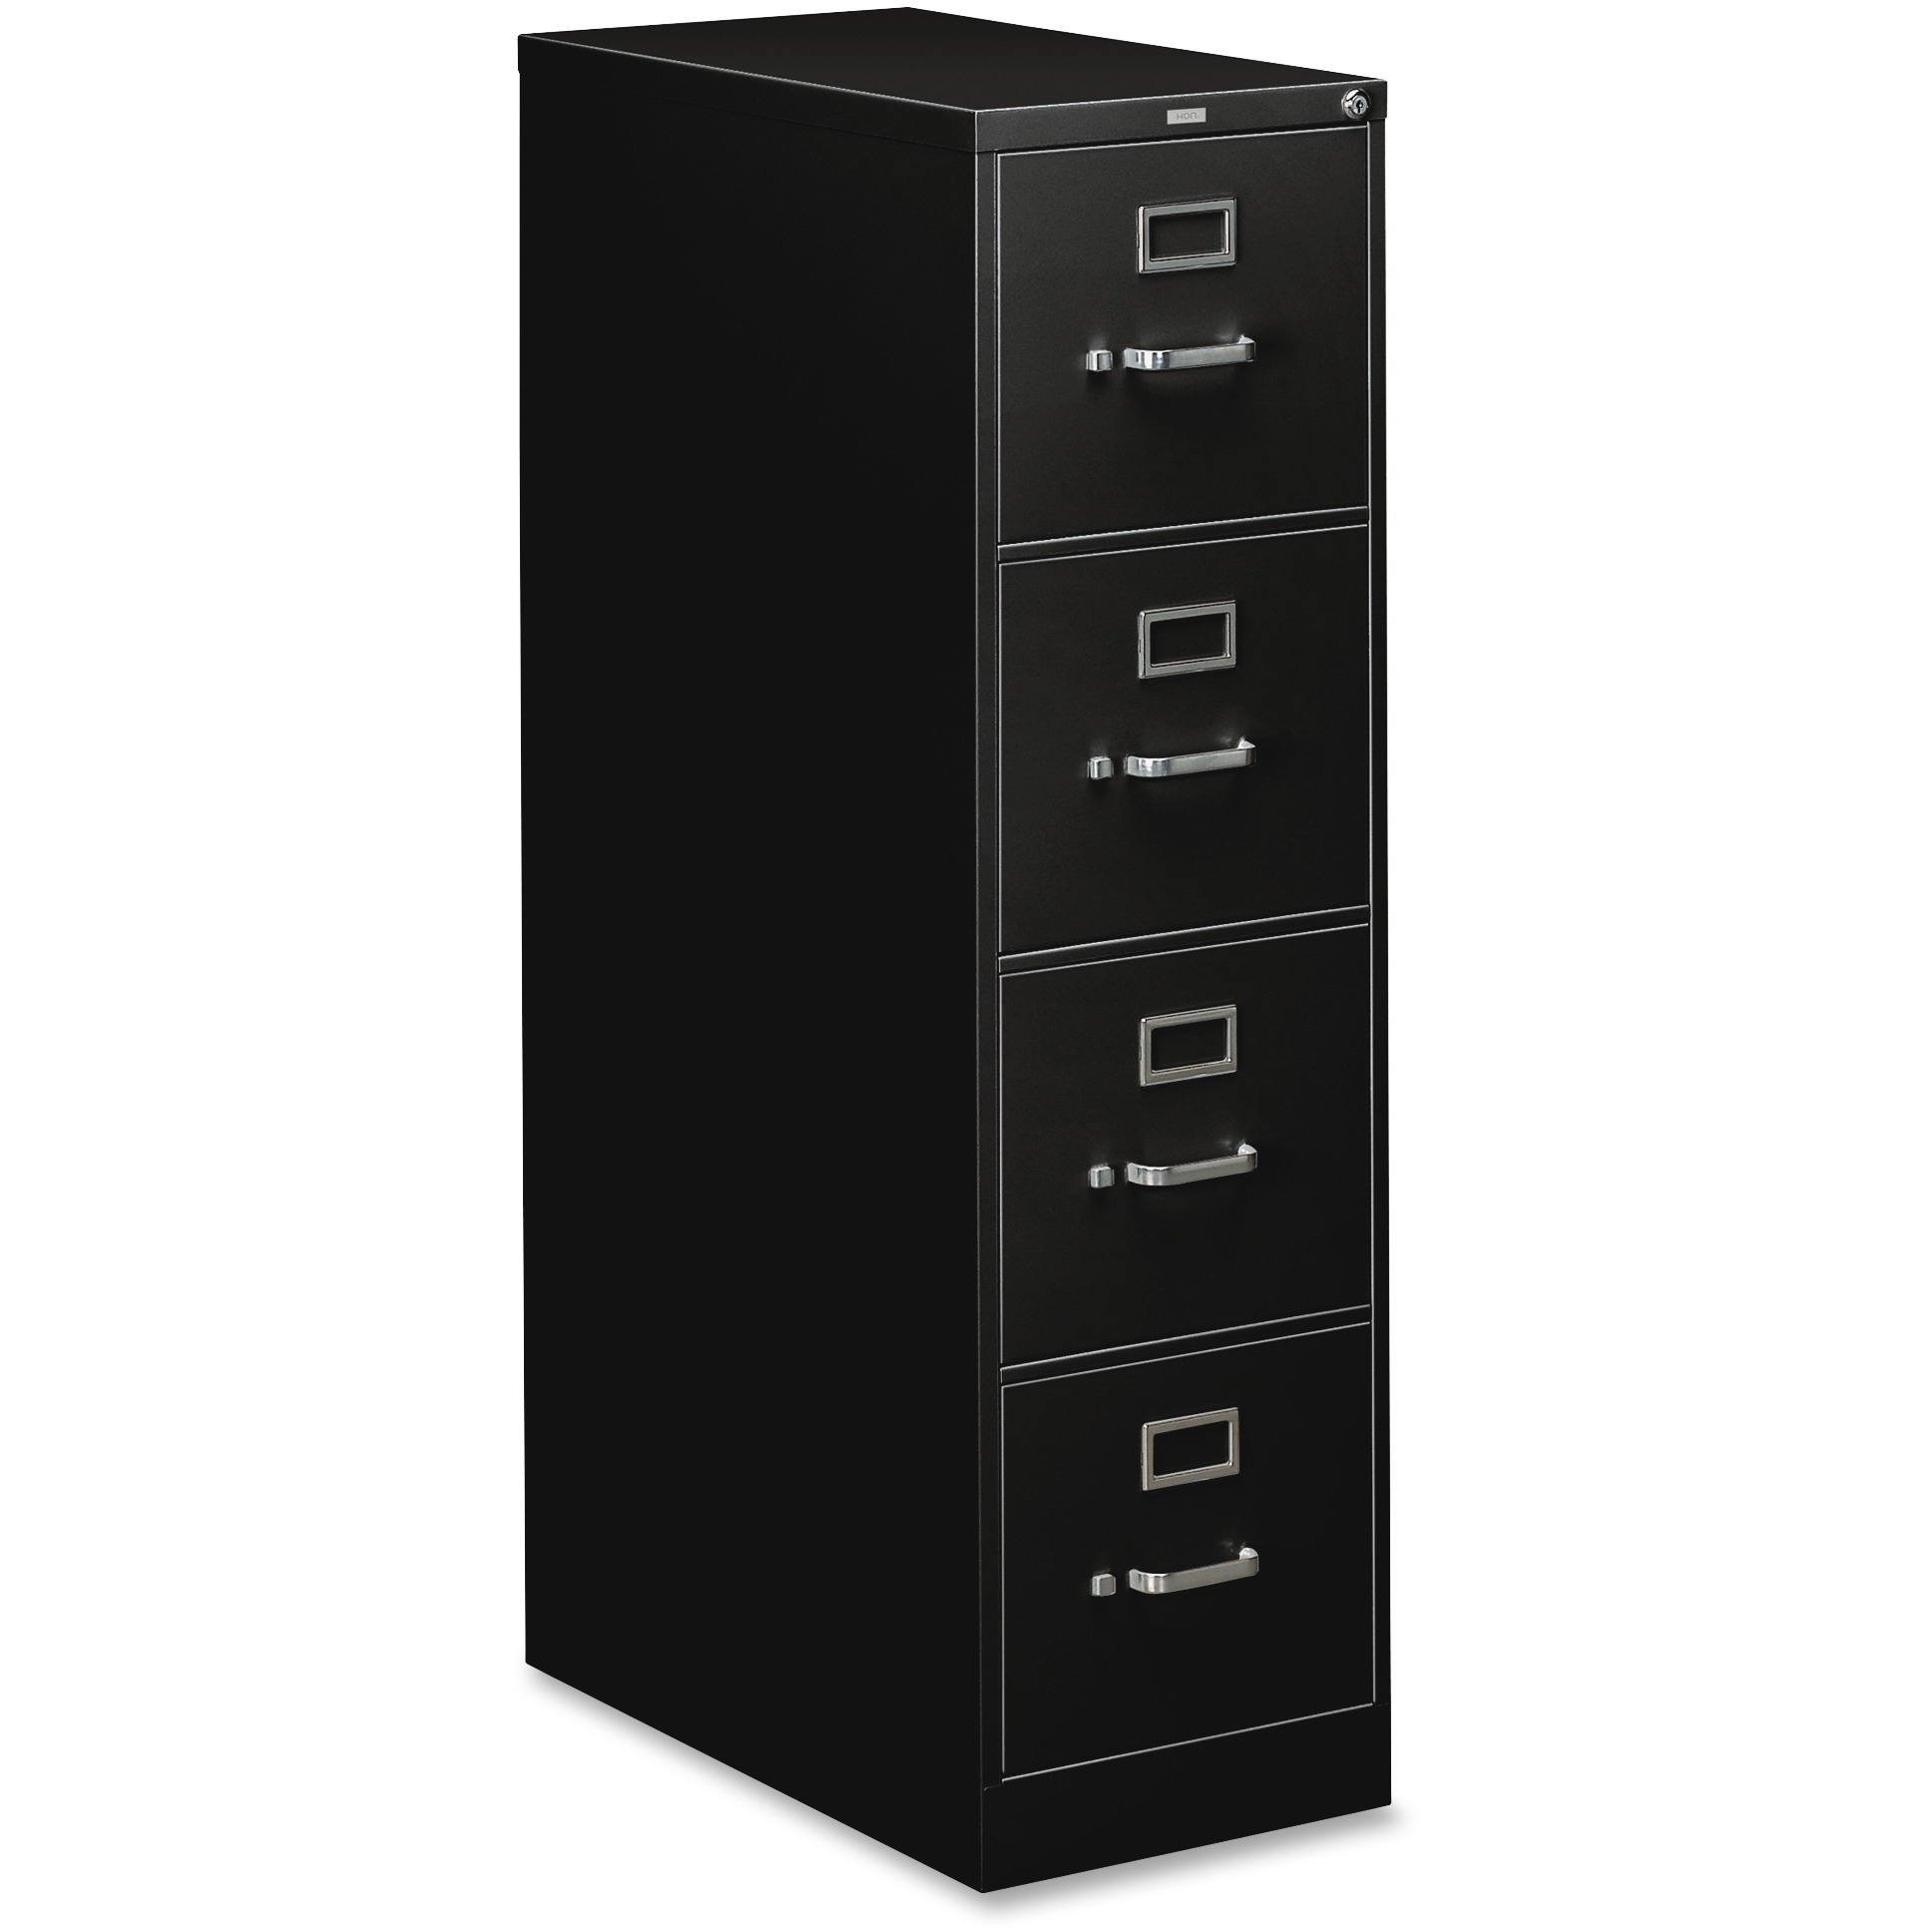 Hon 4 Drawers Vertical Lockable Filing Cabinet Black Walmart with size 1936 X 1936